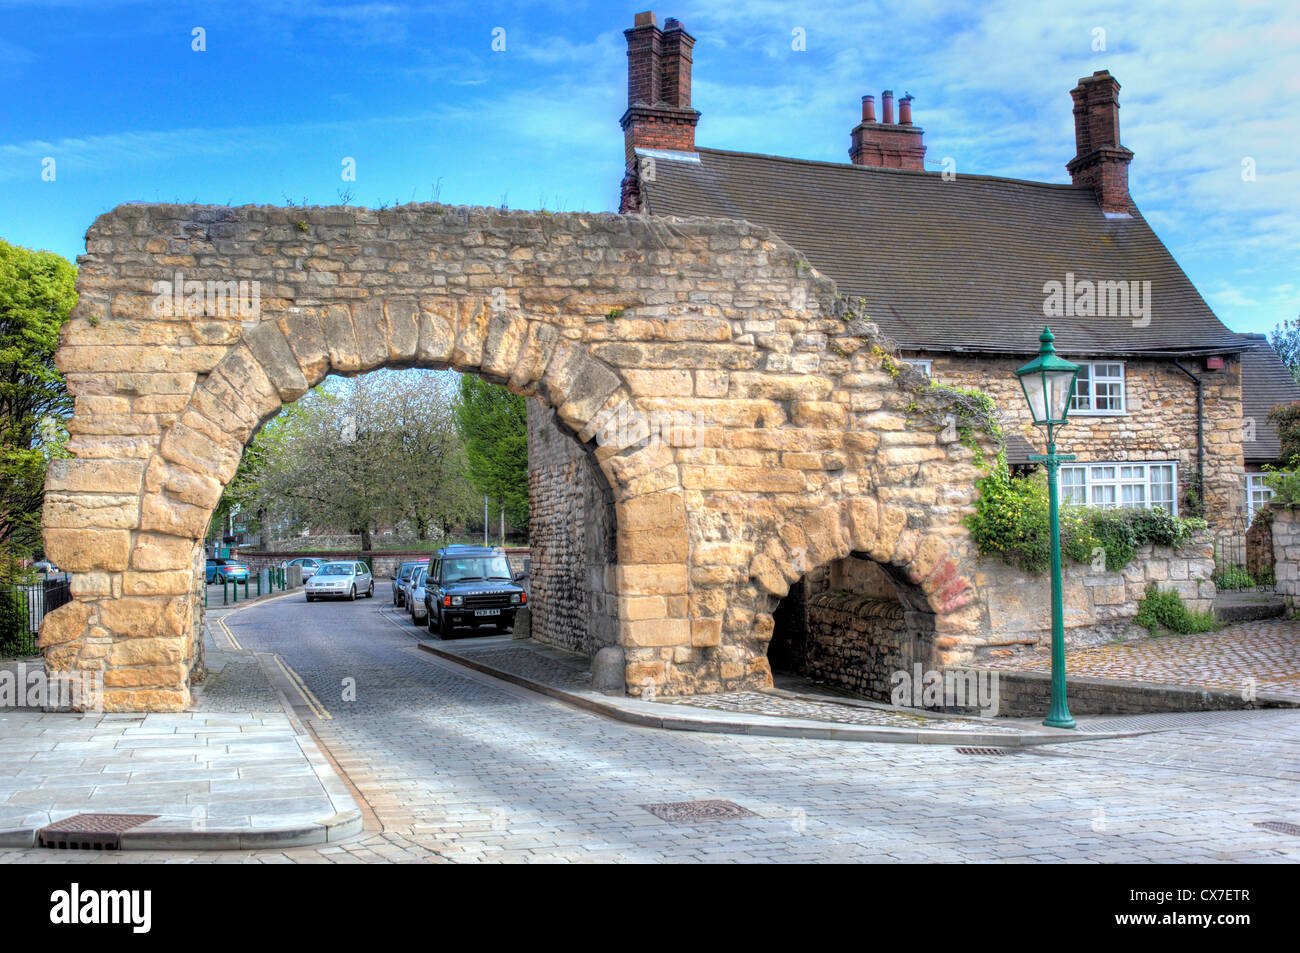 Newport Arch, Lincoln, Lincolnshire, England, UK Stock Photo